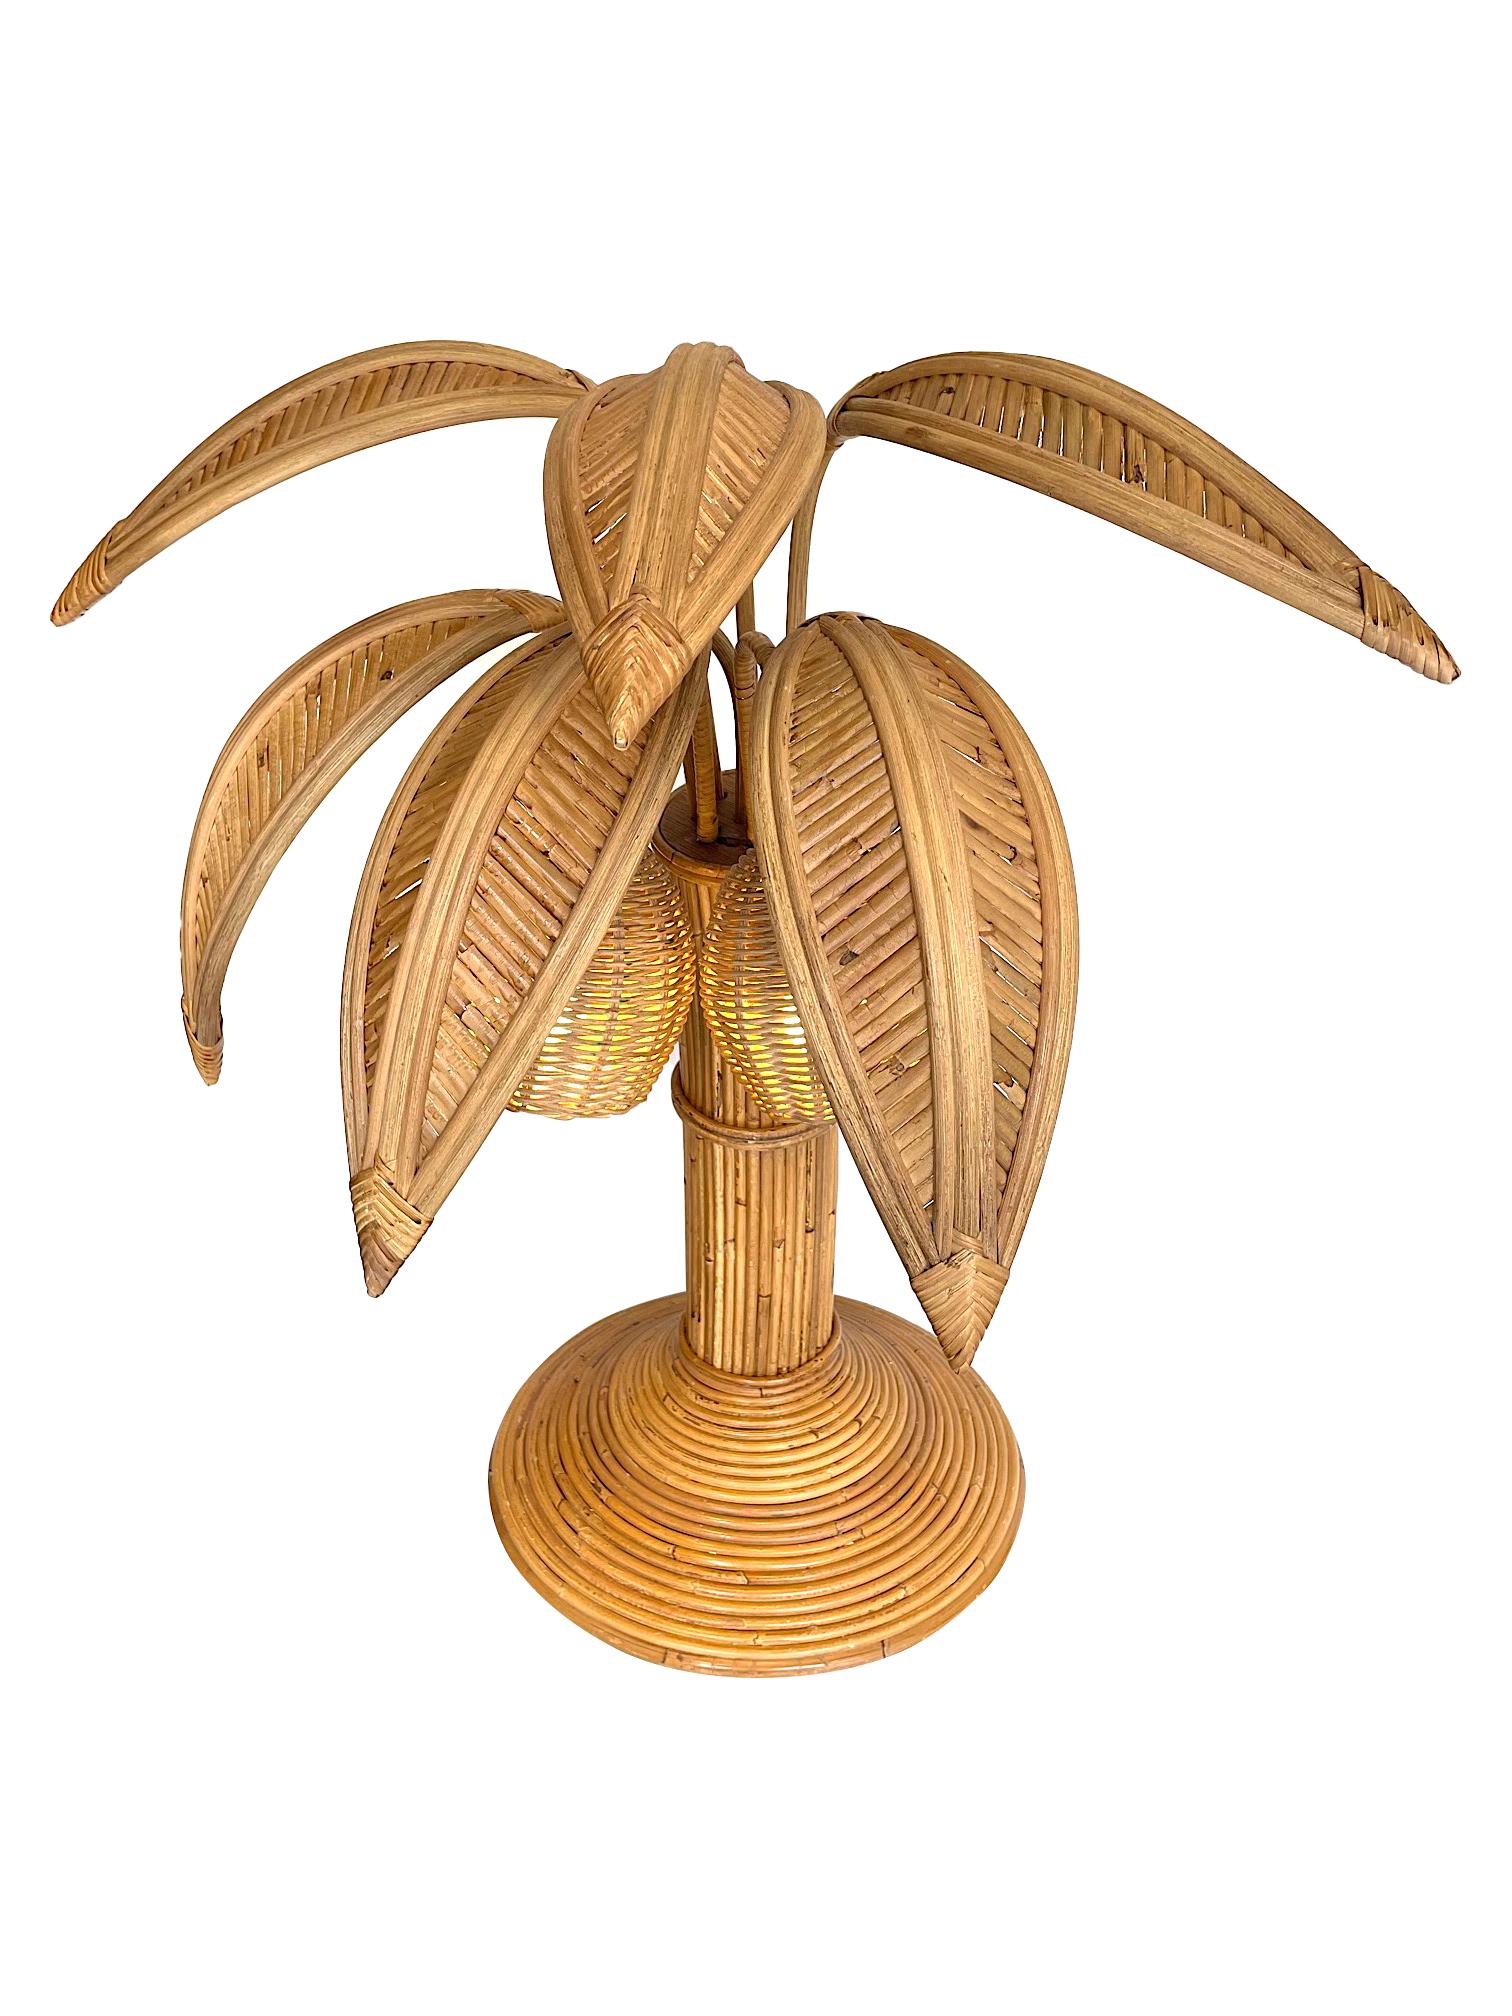 A bamboo palm tree table lamp in the style of Mario Lopez Torres with two coconut lights under the leaves.